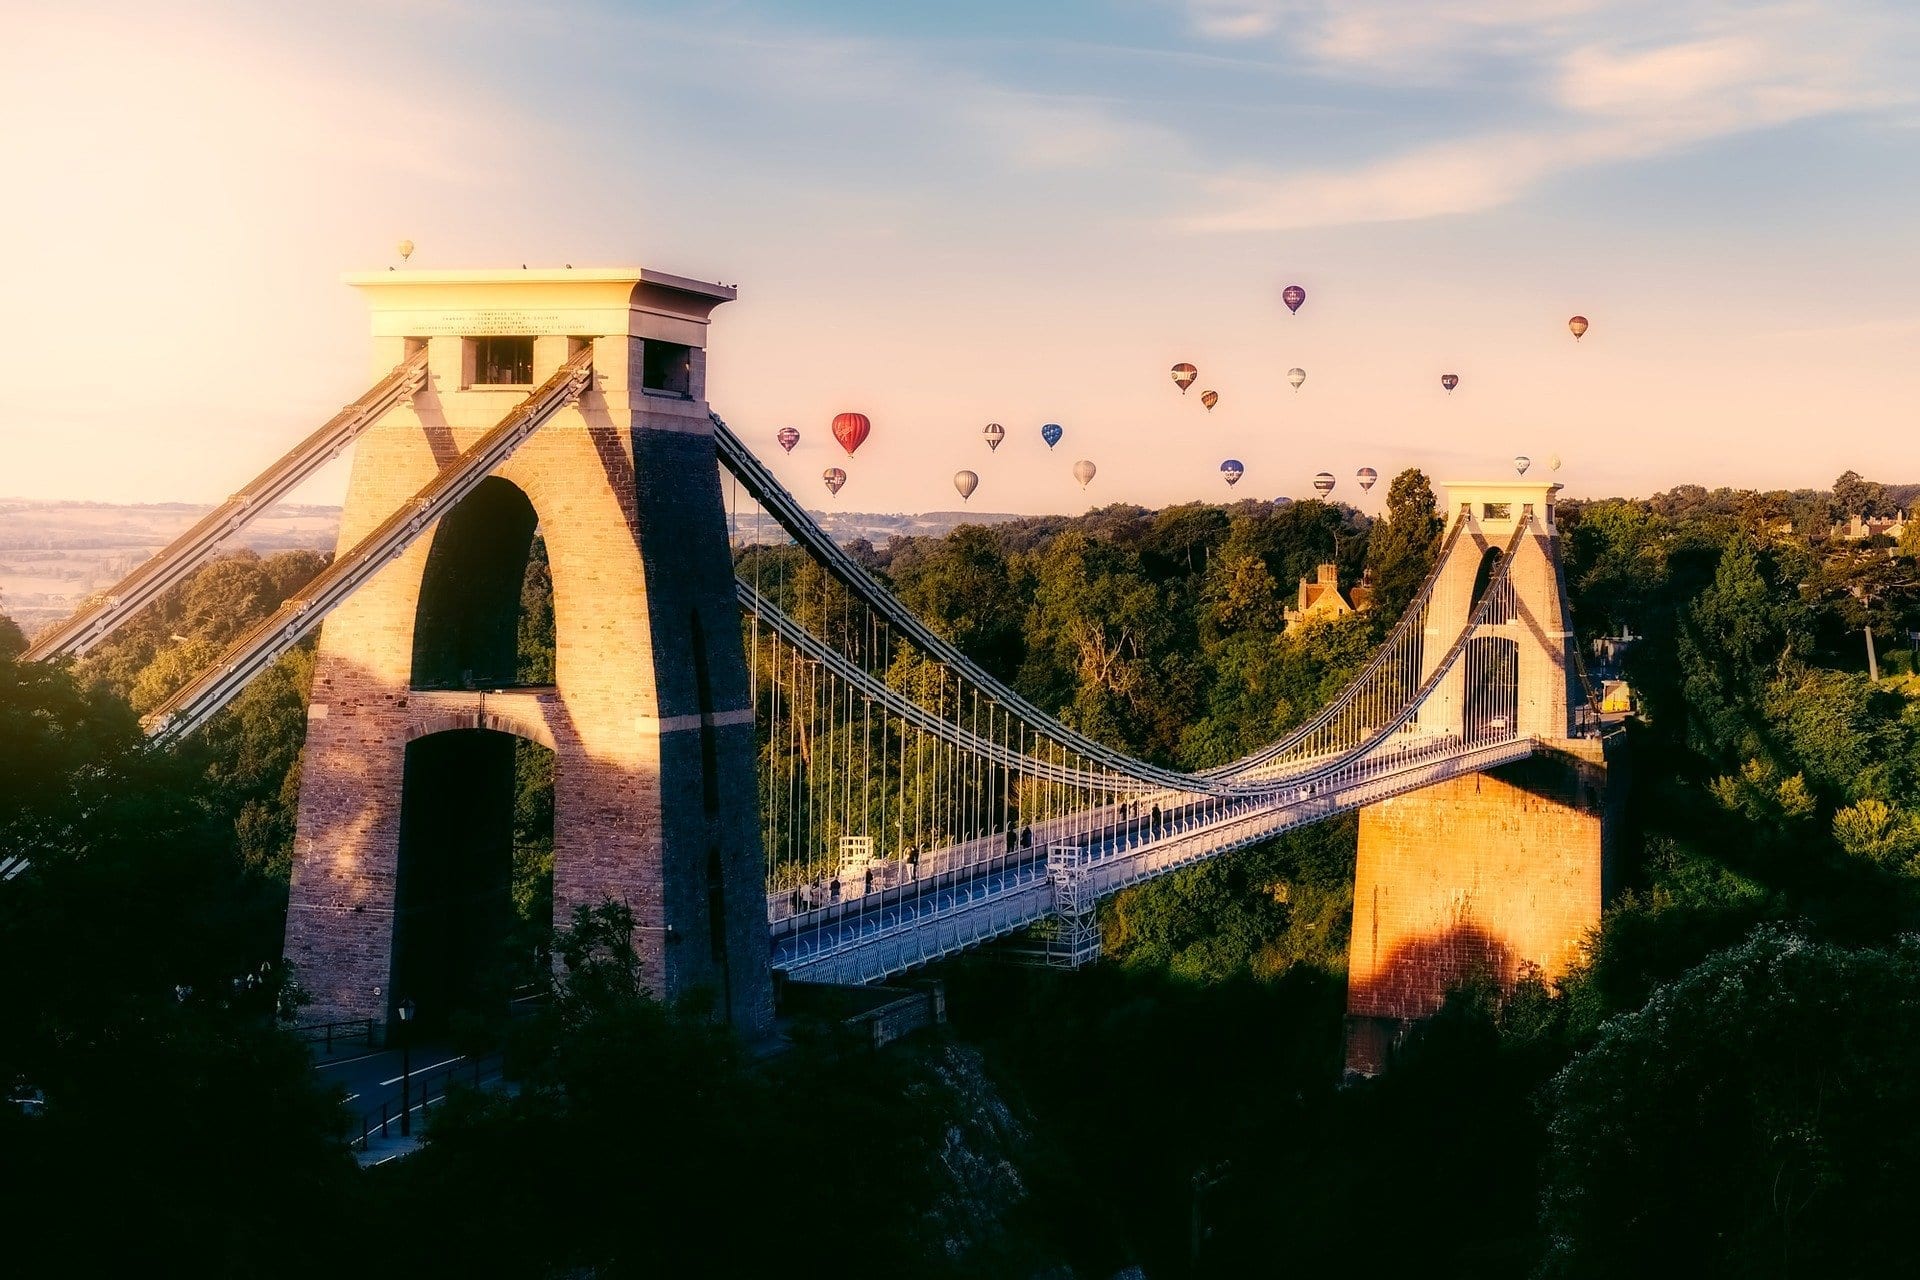 image of a large bridge with hot air balloons in the sky